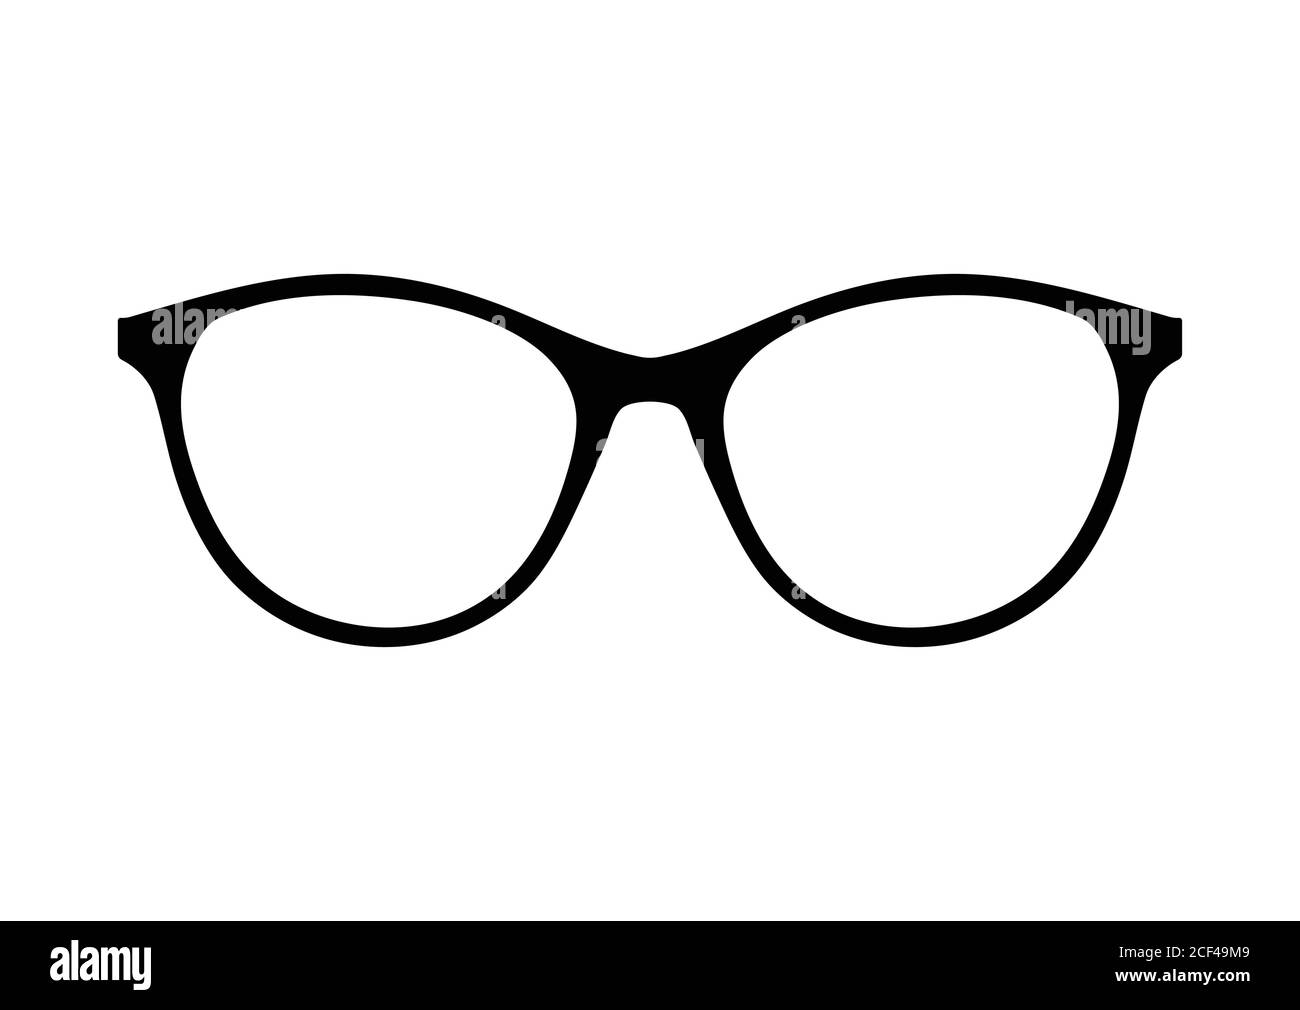 Glasses vector. Accessory art black collection cool flat design. Vector illustration of elegan spectacles in black frame white background. Stock Vector